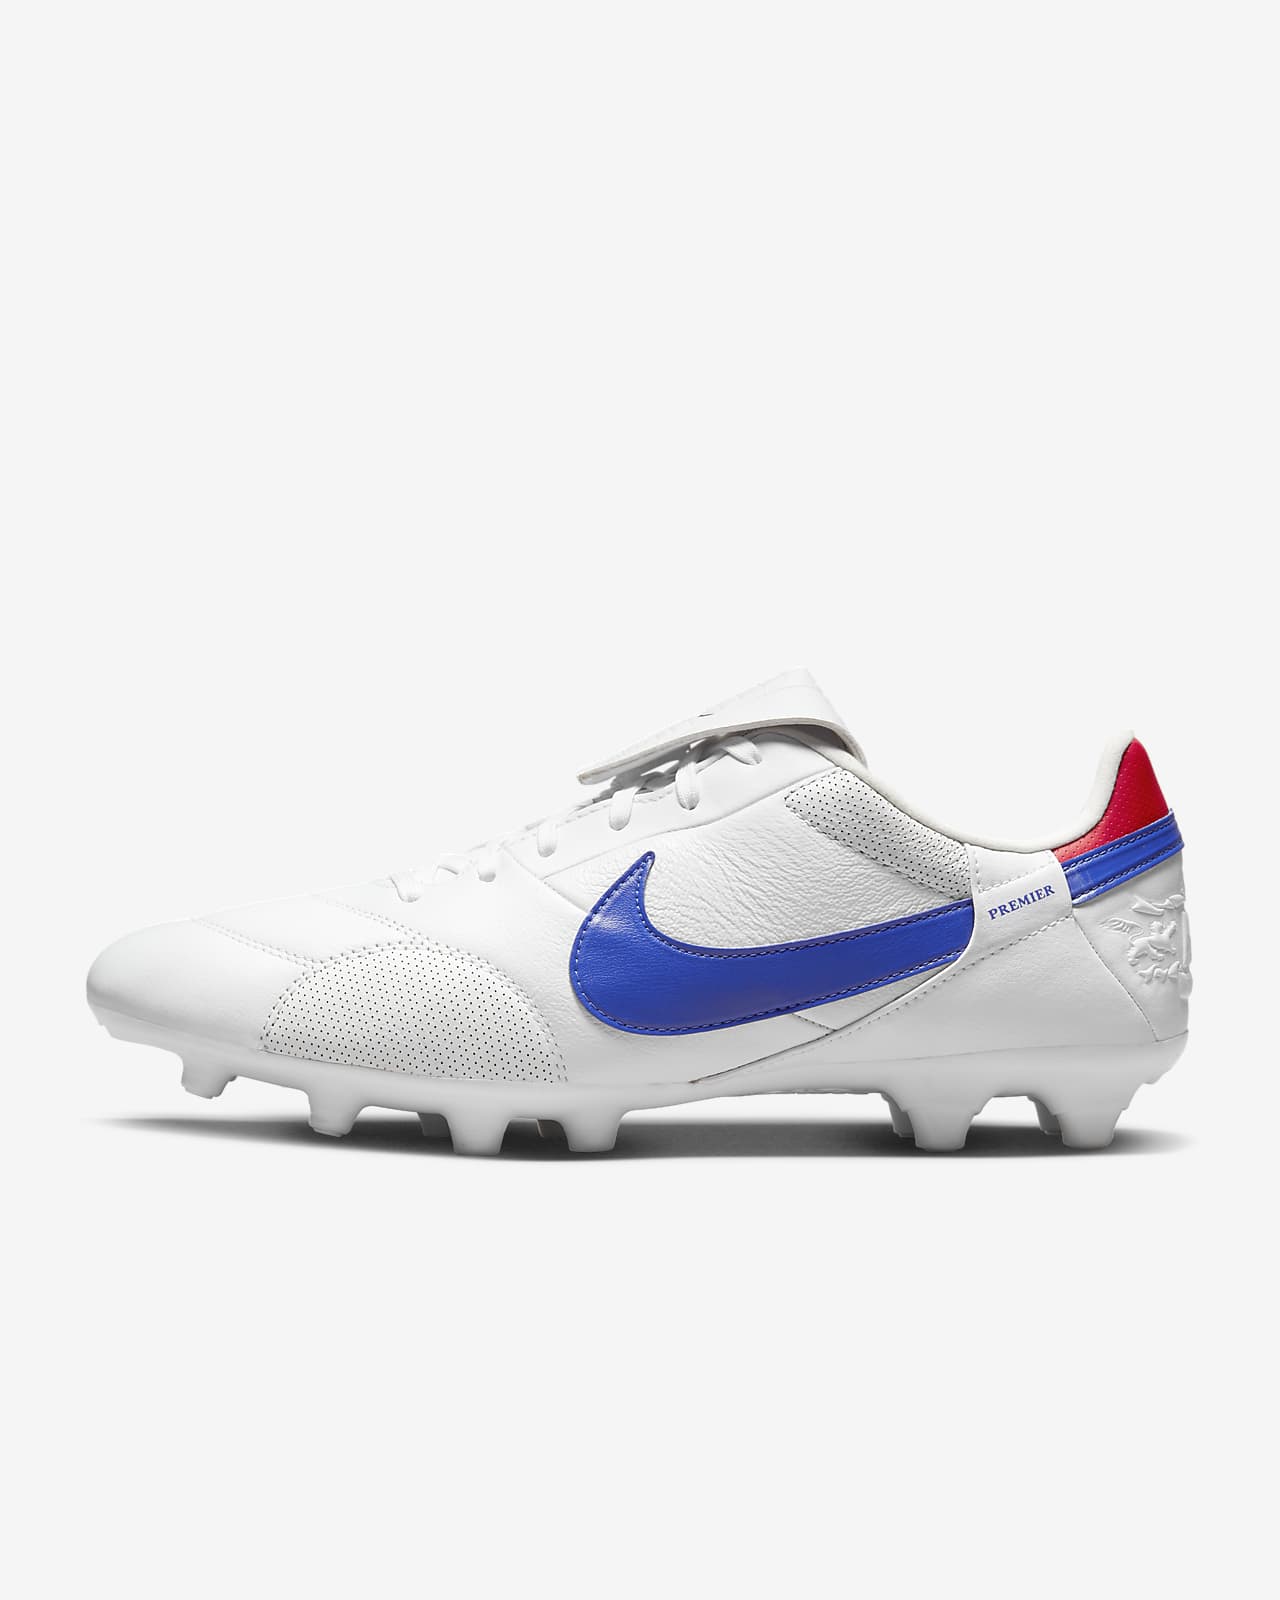 FG Firm-Ground Soccer Cleats. Nike 